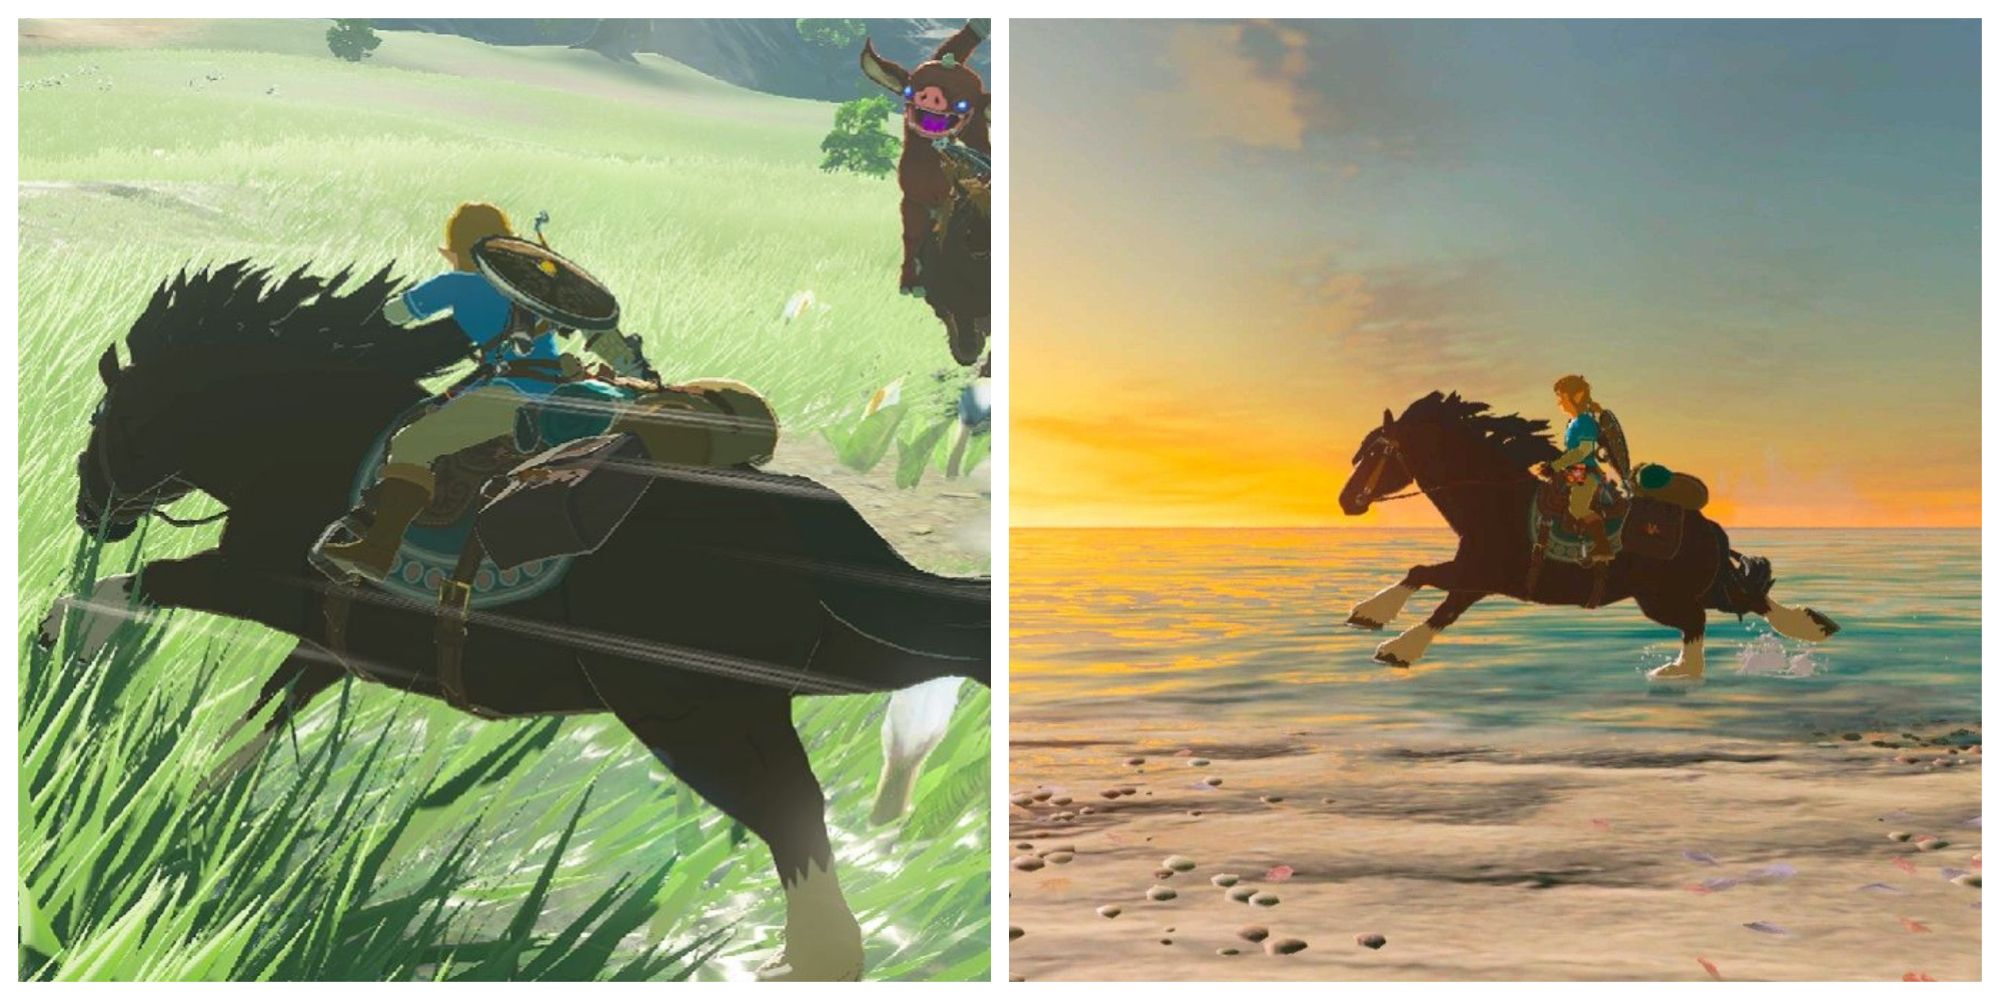 Legend of Zelda breath of the wild link riding a horse